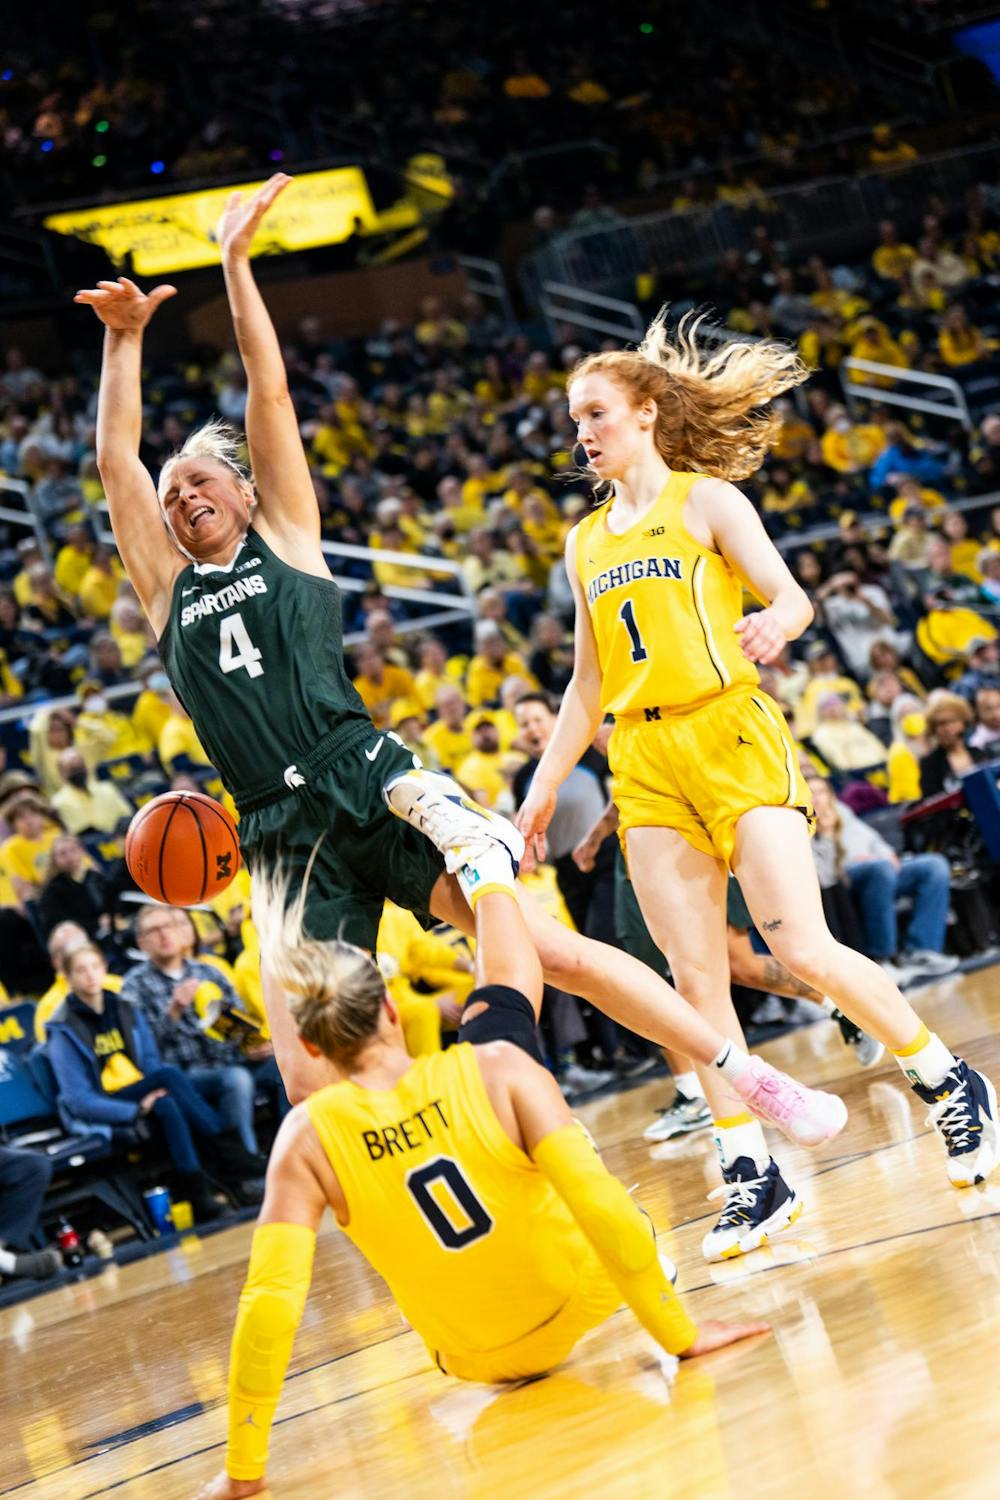 <p>Michigan State sophomore guard No. 4 Theryn Hallock falls after a shot attempt at the Crisler center in Ann Arbor on Feb. 18, 2024. Michigan State secured a season sweep of the rival Wolverines, breaking a two-game losing streak in the process.</p>